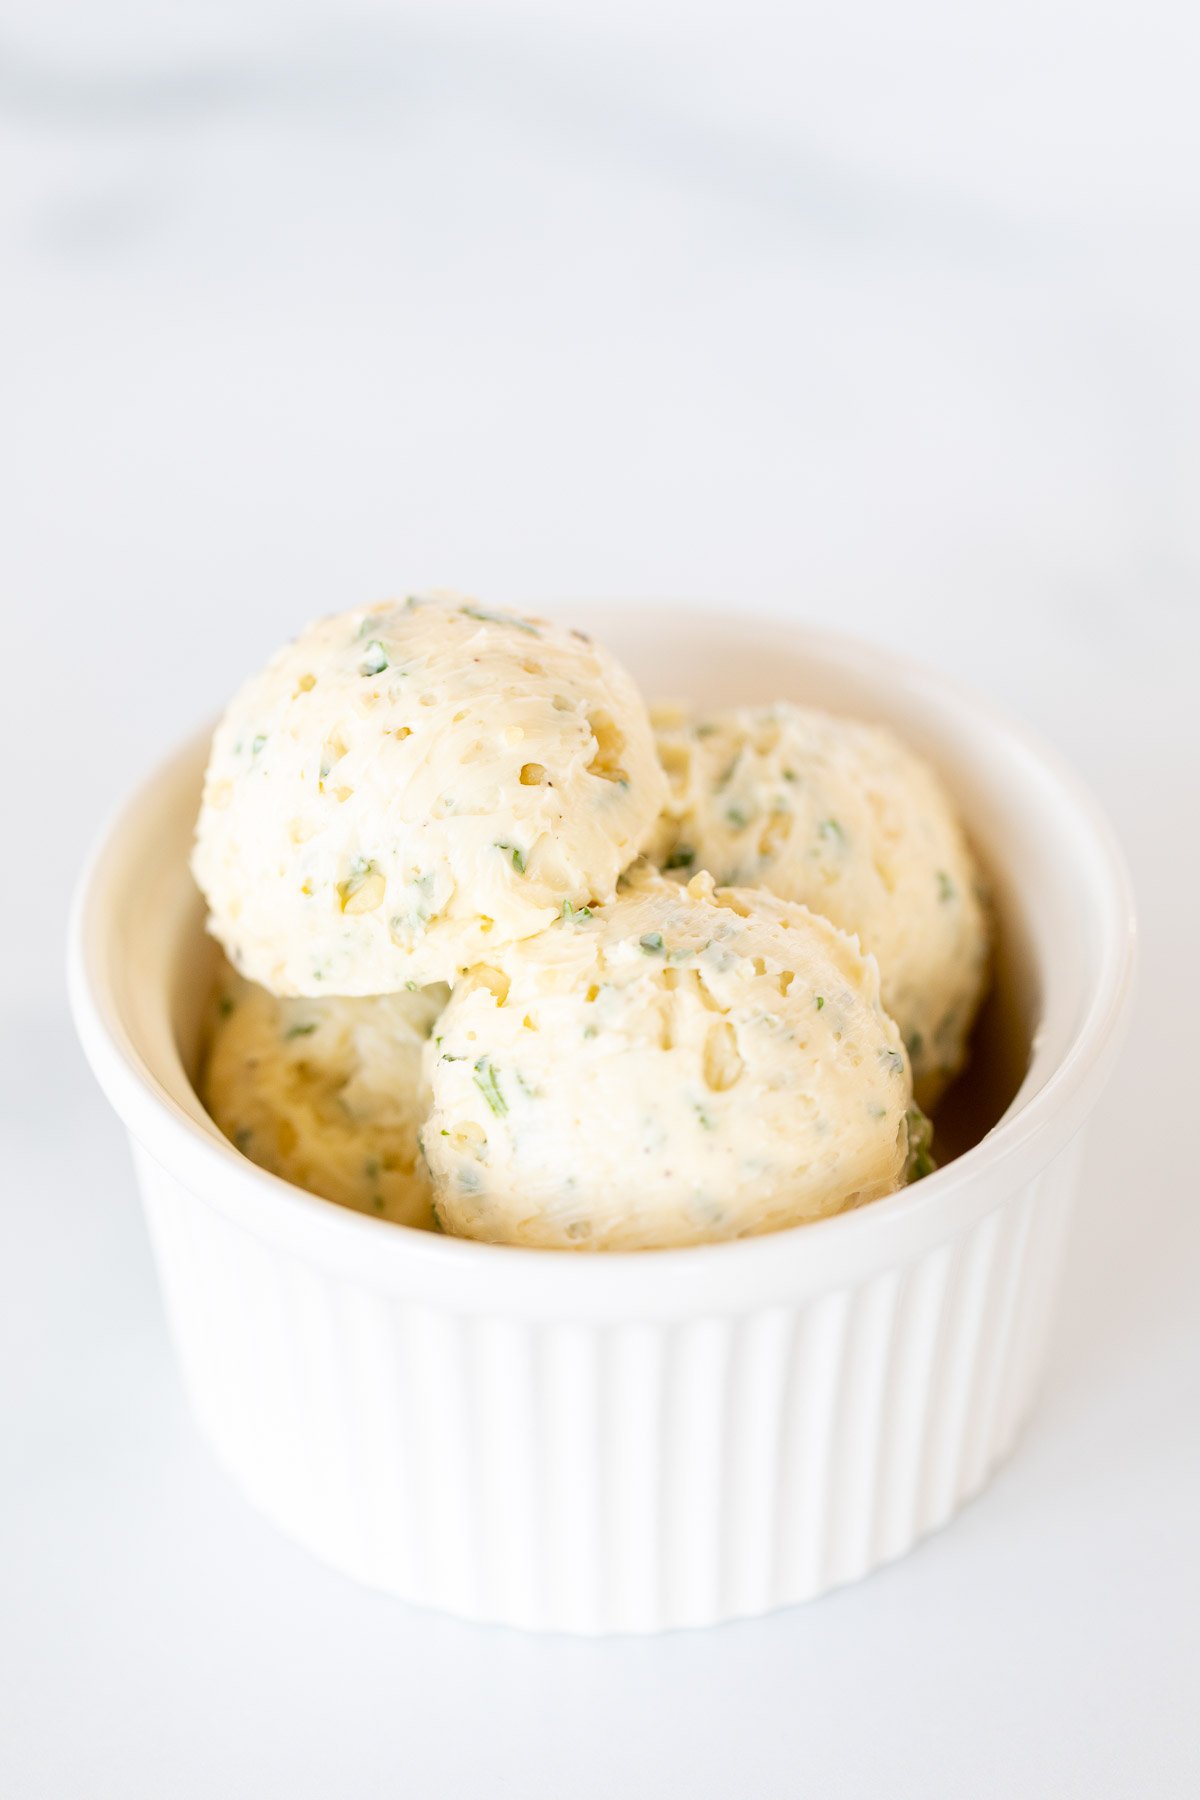 Scoops of herbed steak butter inside a white bowl.